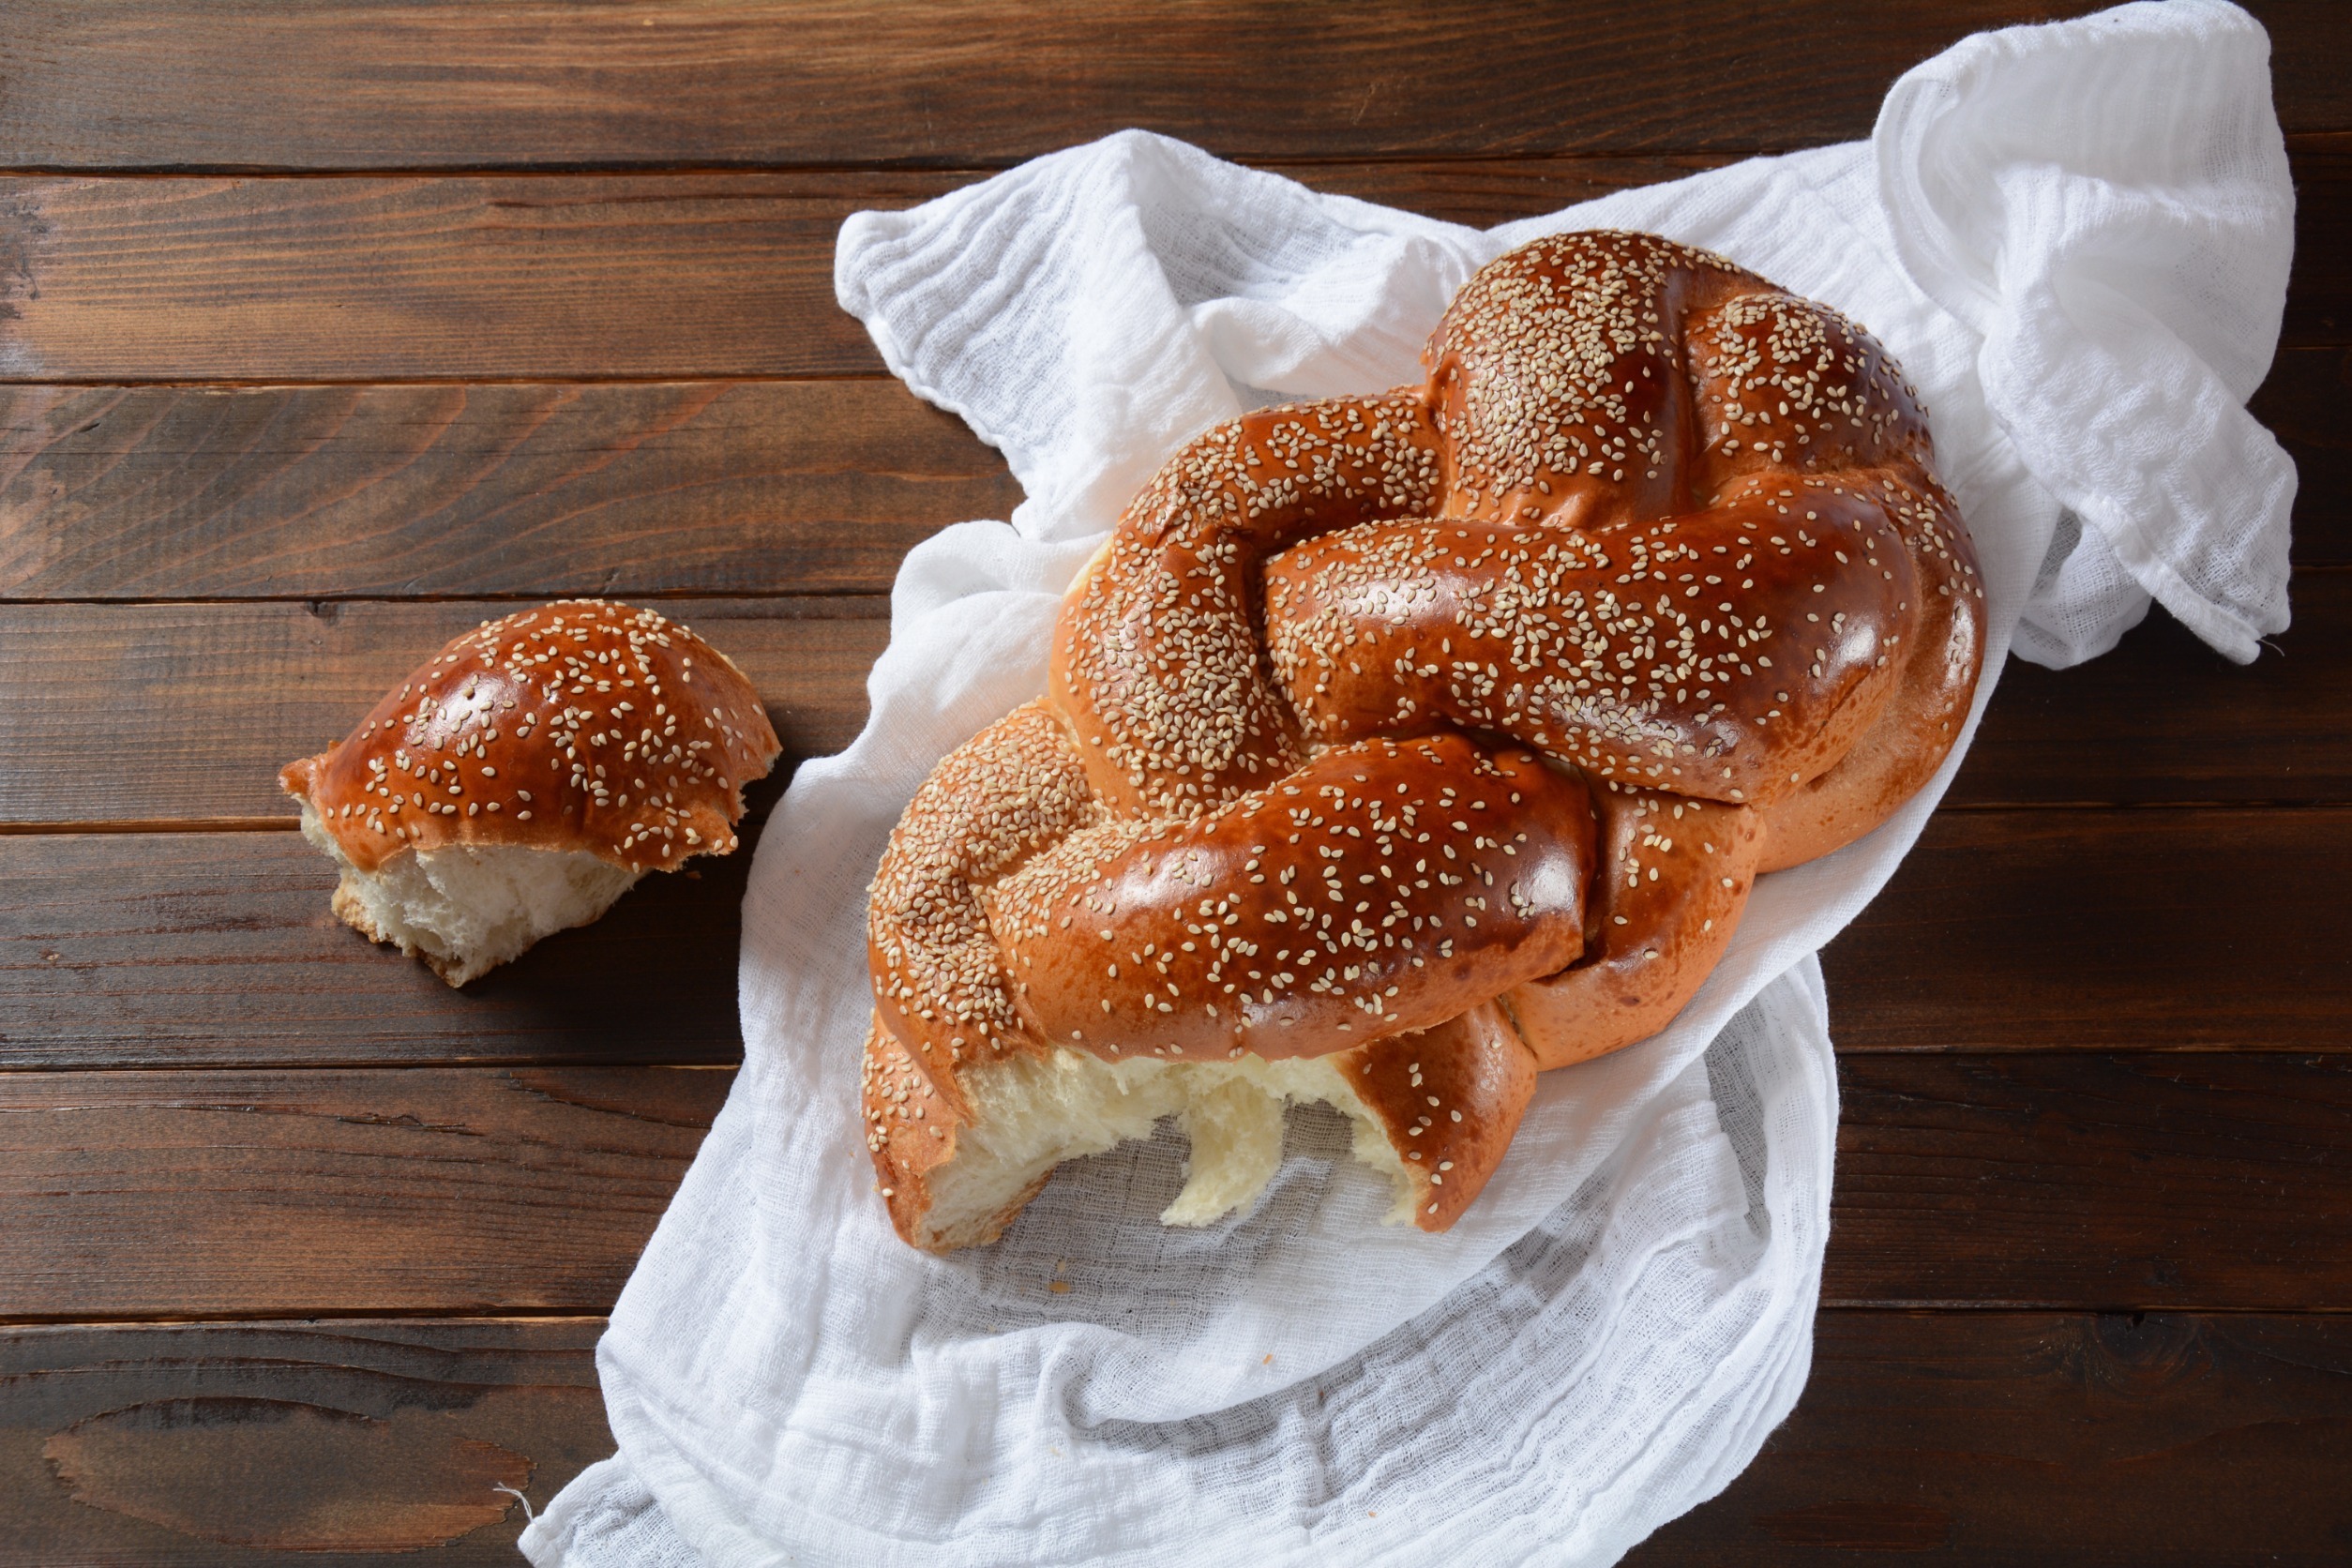 Homemade challah bread with sesame seeds. Jewish traditional bread for Shabbat